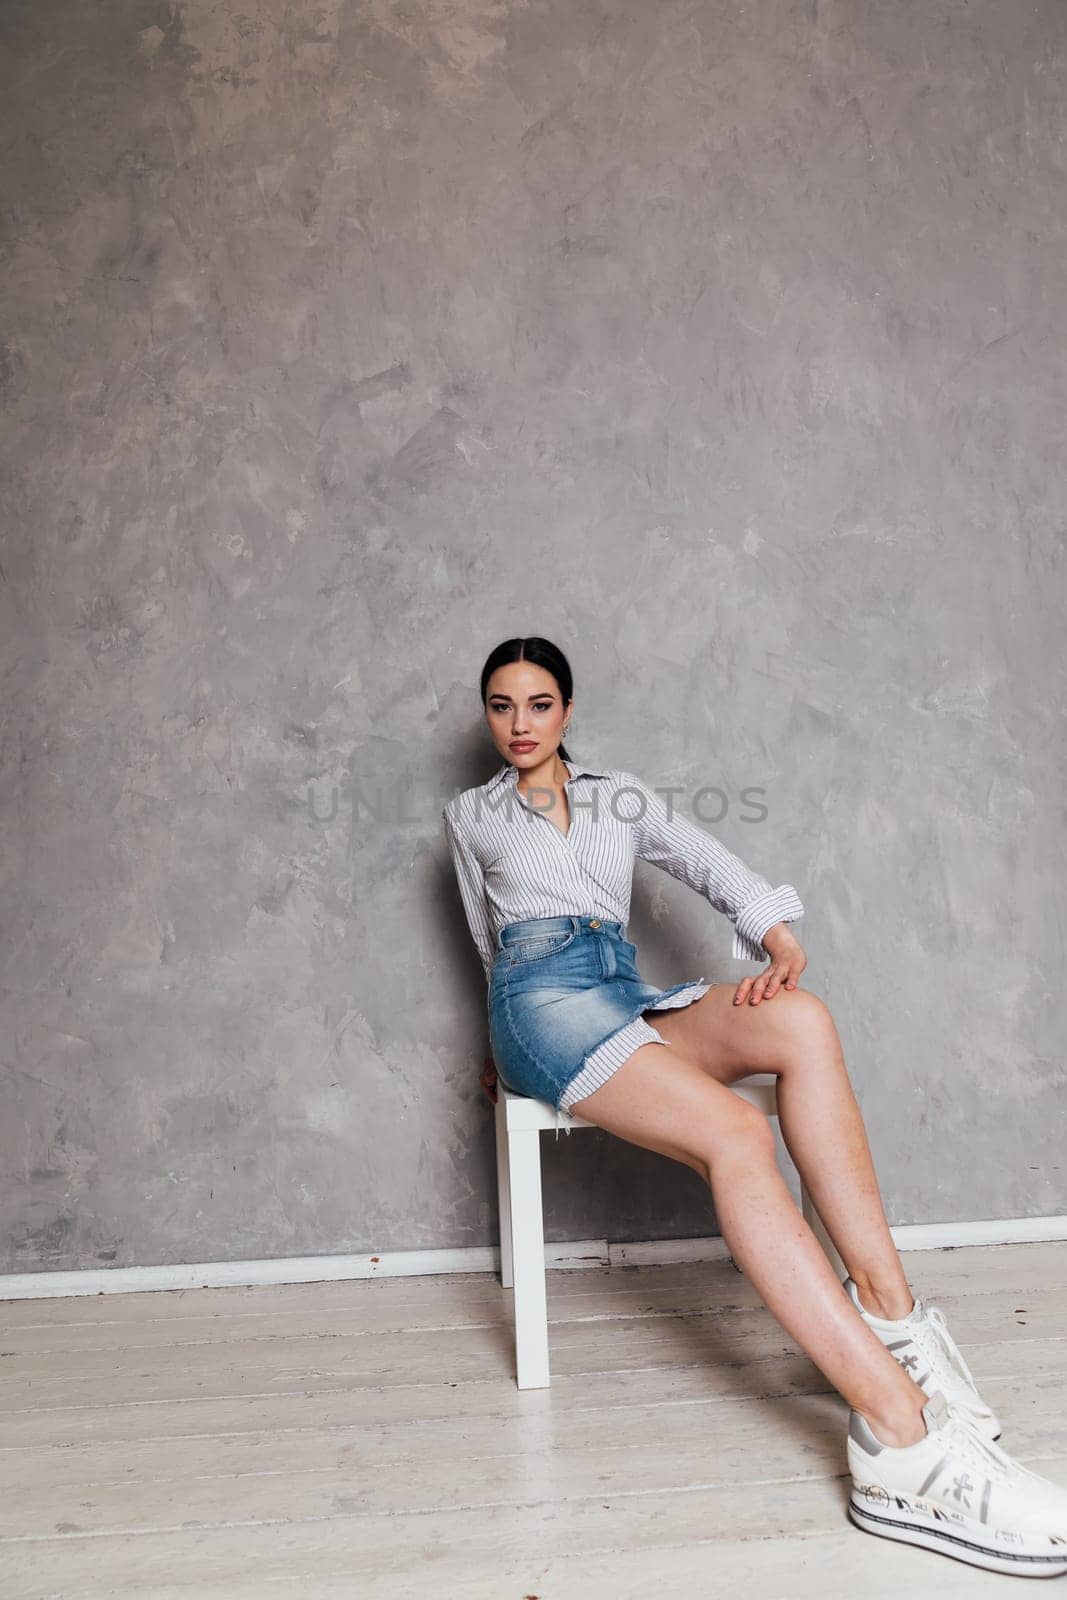 fashionable woman in a denim skirt sits on a chair with a gray background